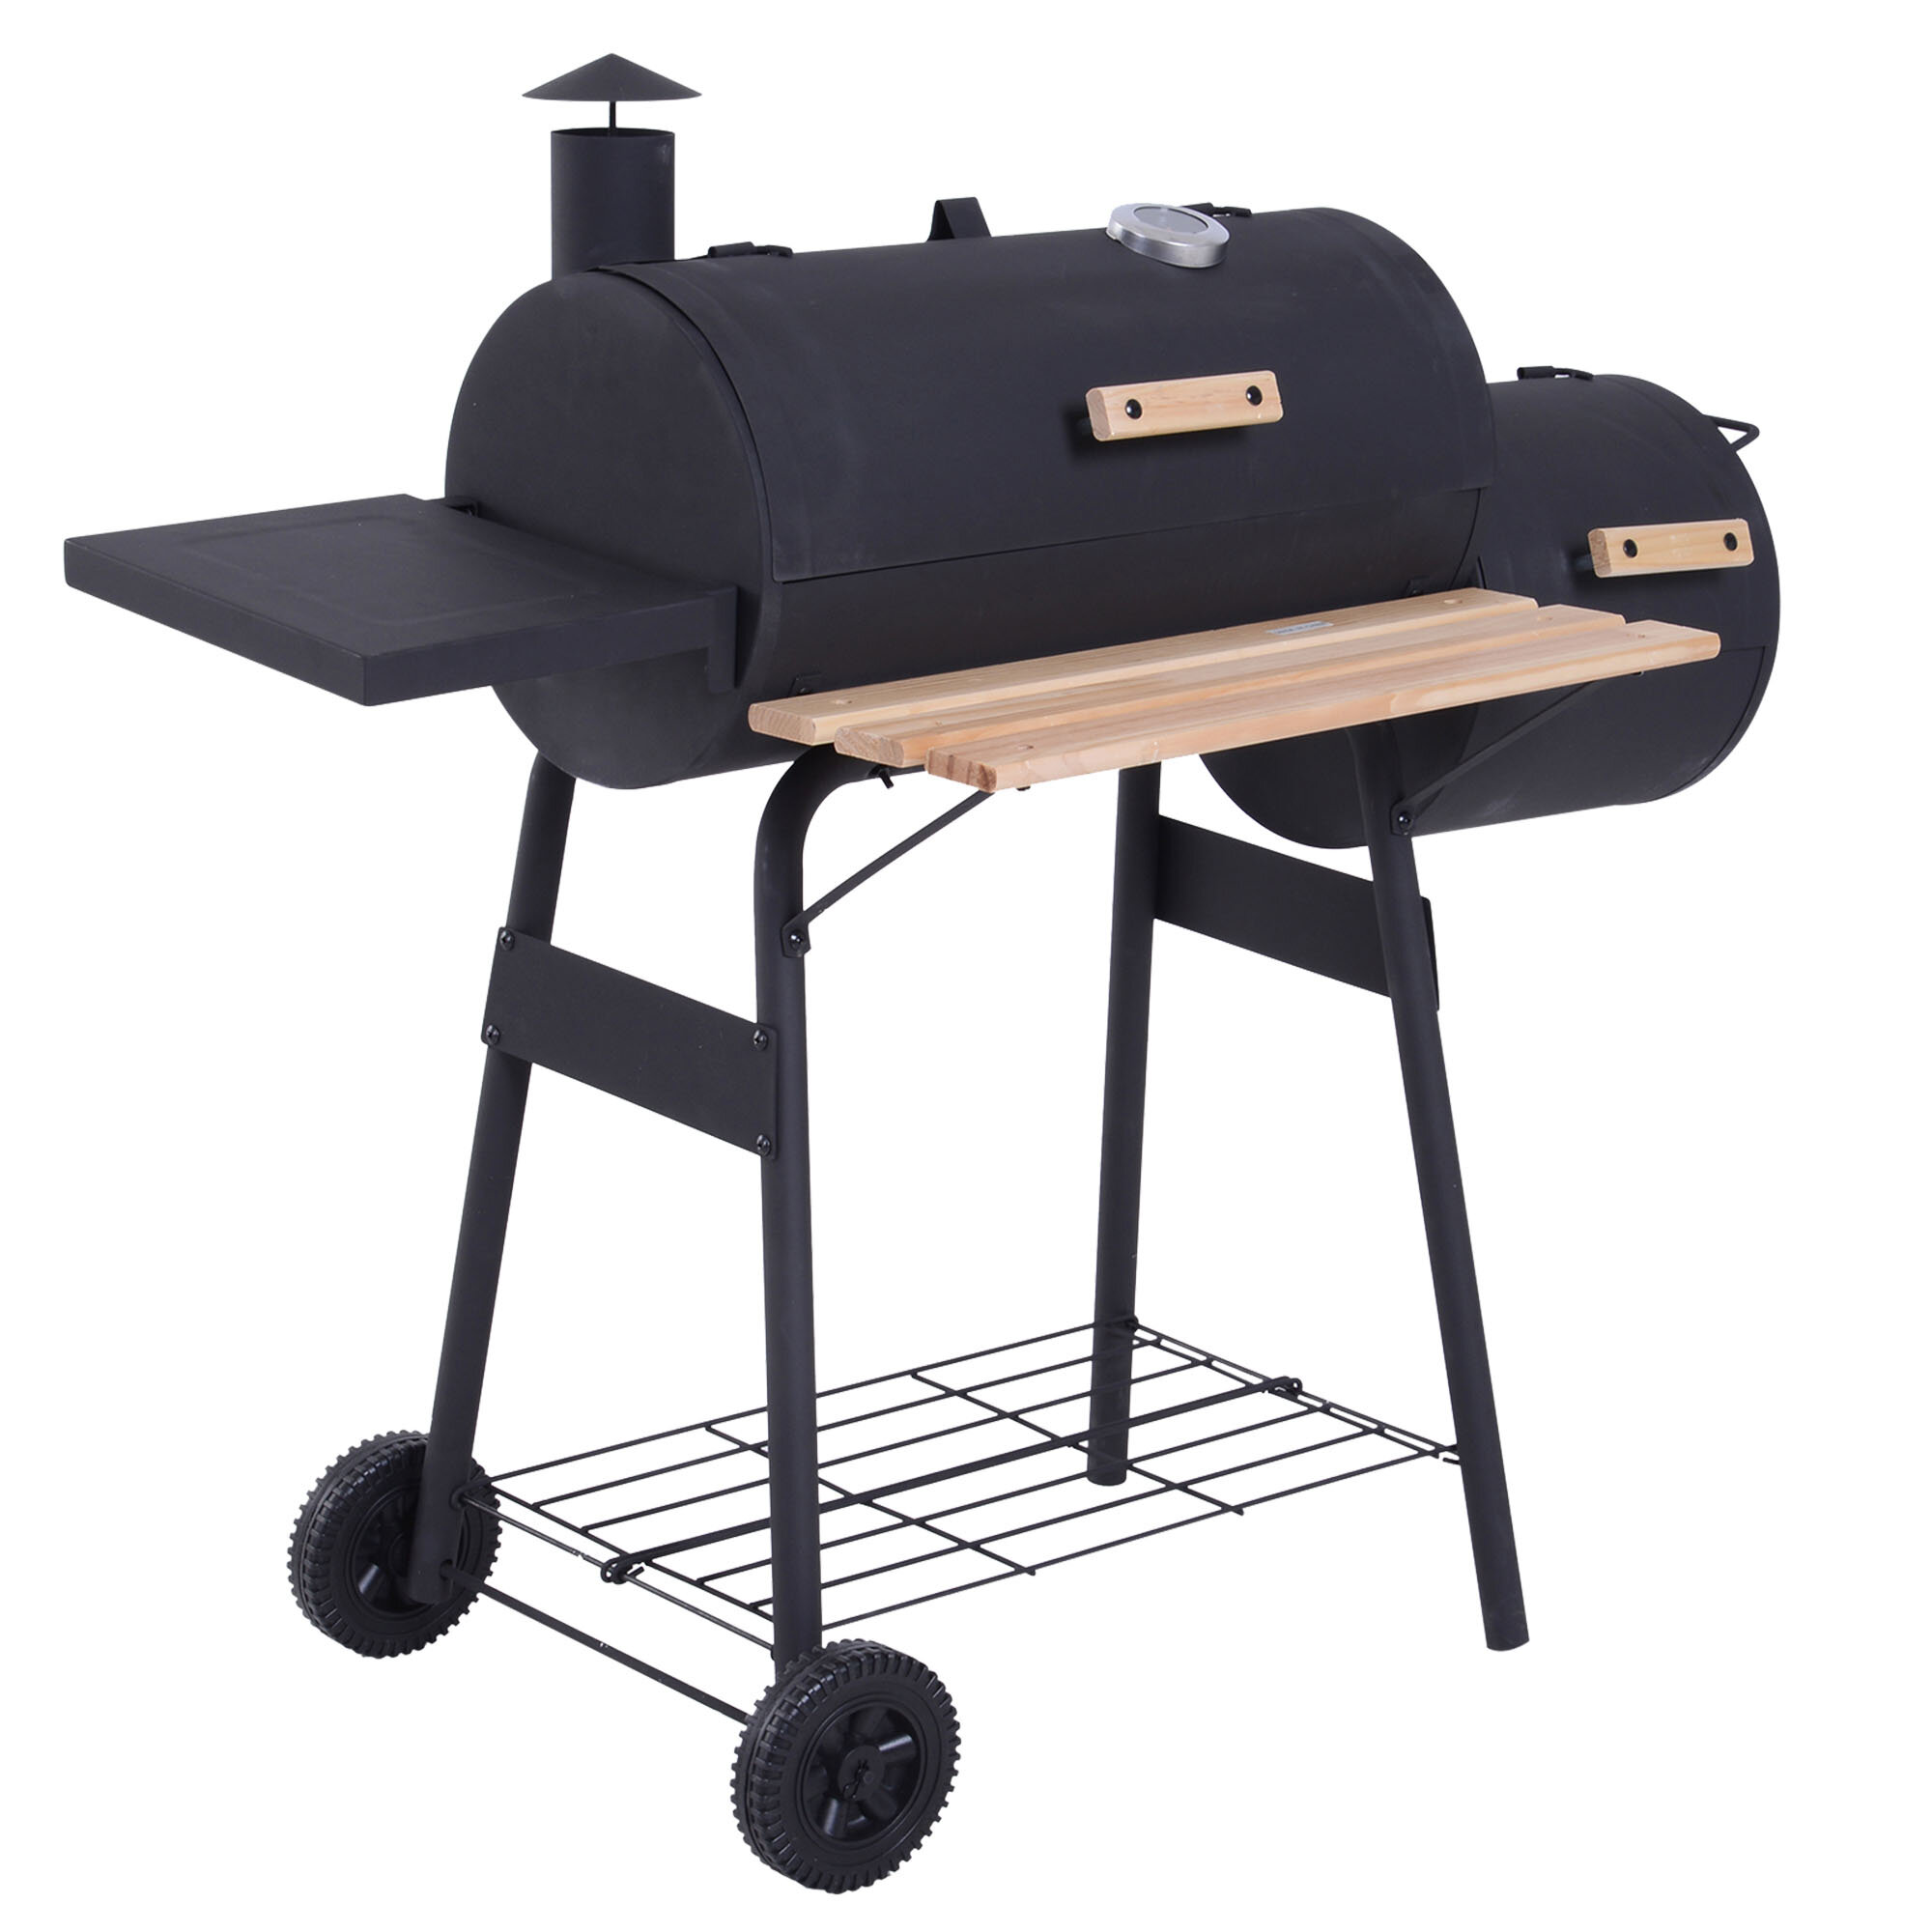  RANRANJJ Large Charcoal Grill, Outdoor Cooking Smoker Grill  Patio Barbeque Griller for Picnic, Patio and Backyard Barbecue : Patio,  Lawn & Garden